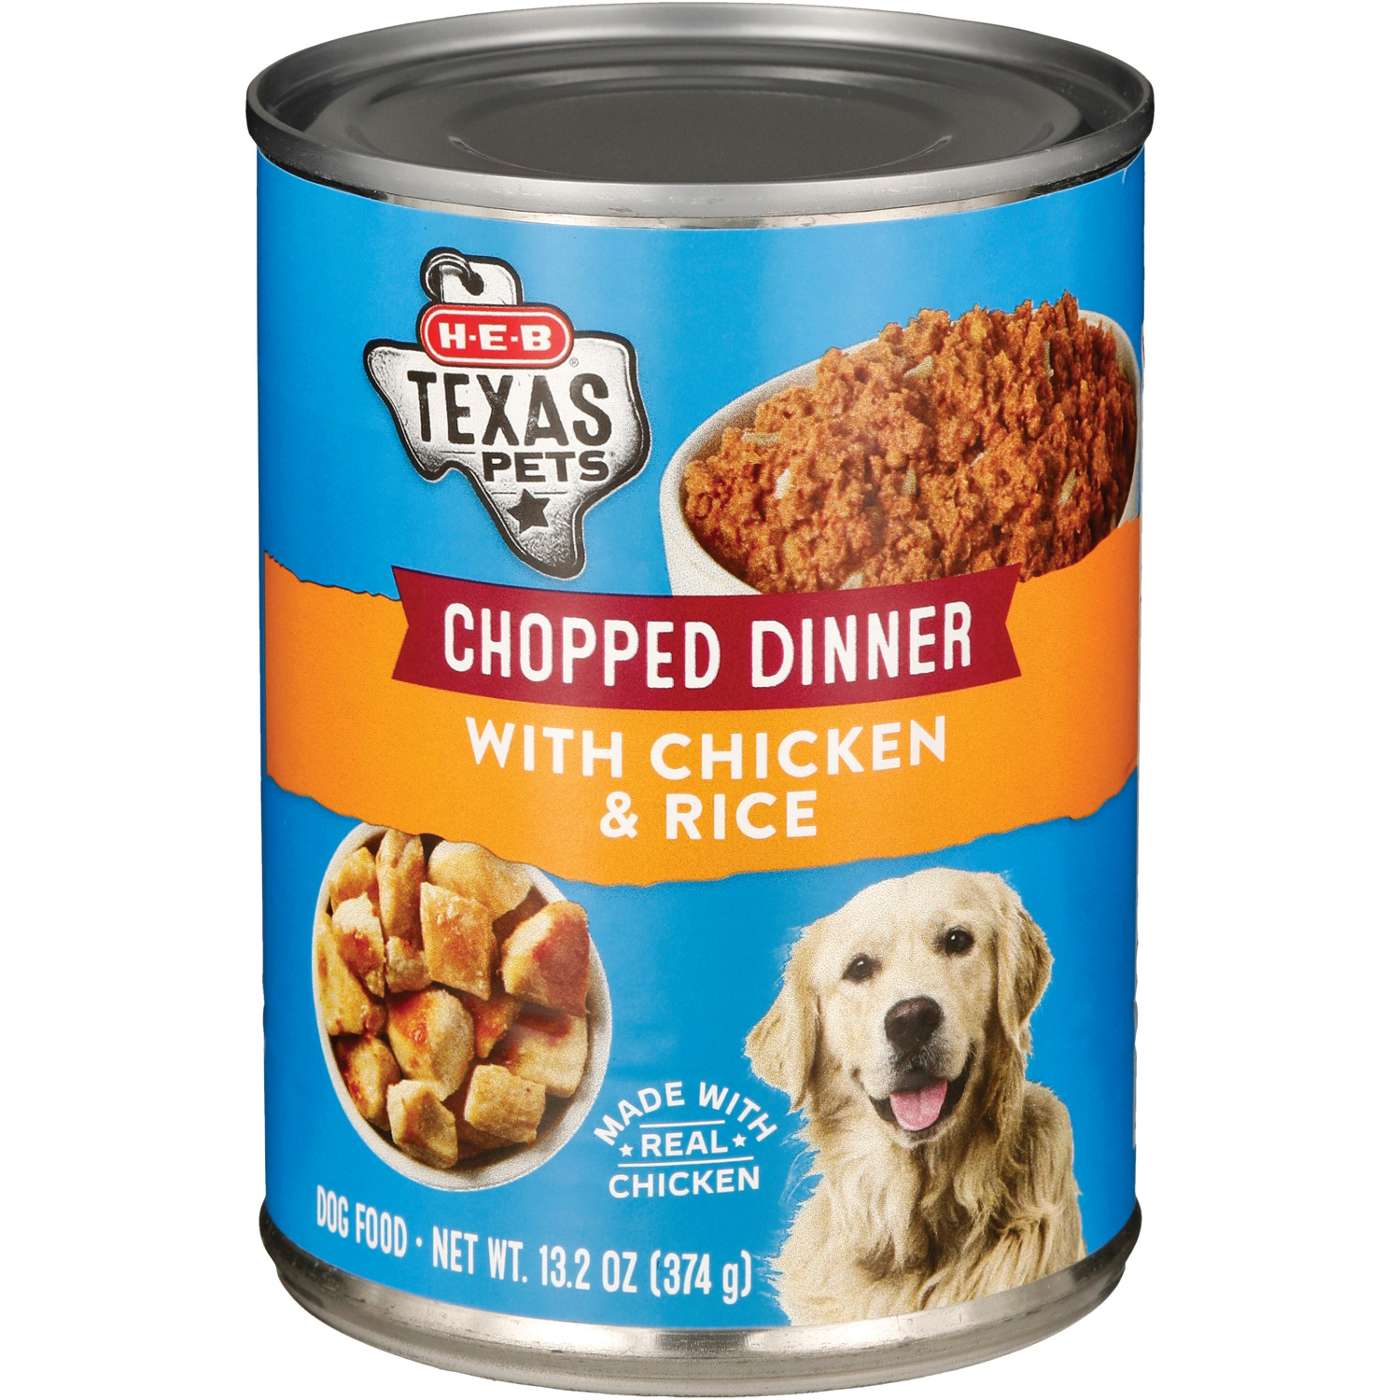 H-E-B Texas Pets Chopped Chicken & Rice Wet Dog Food; image 2 of 2